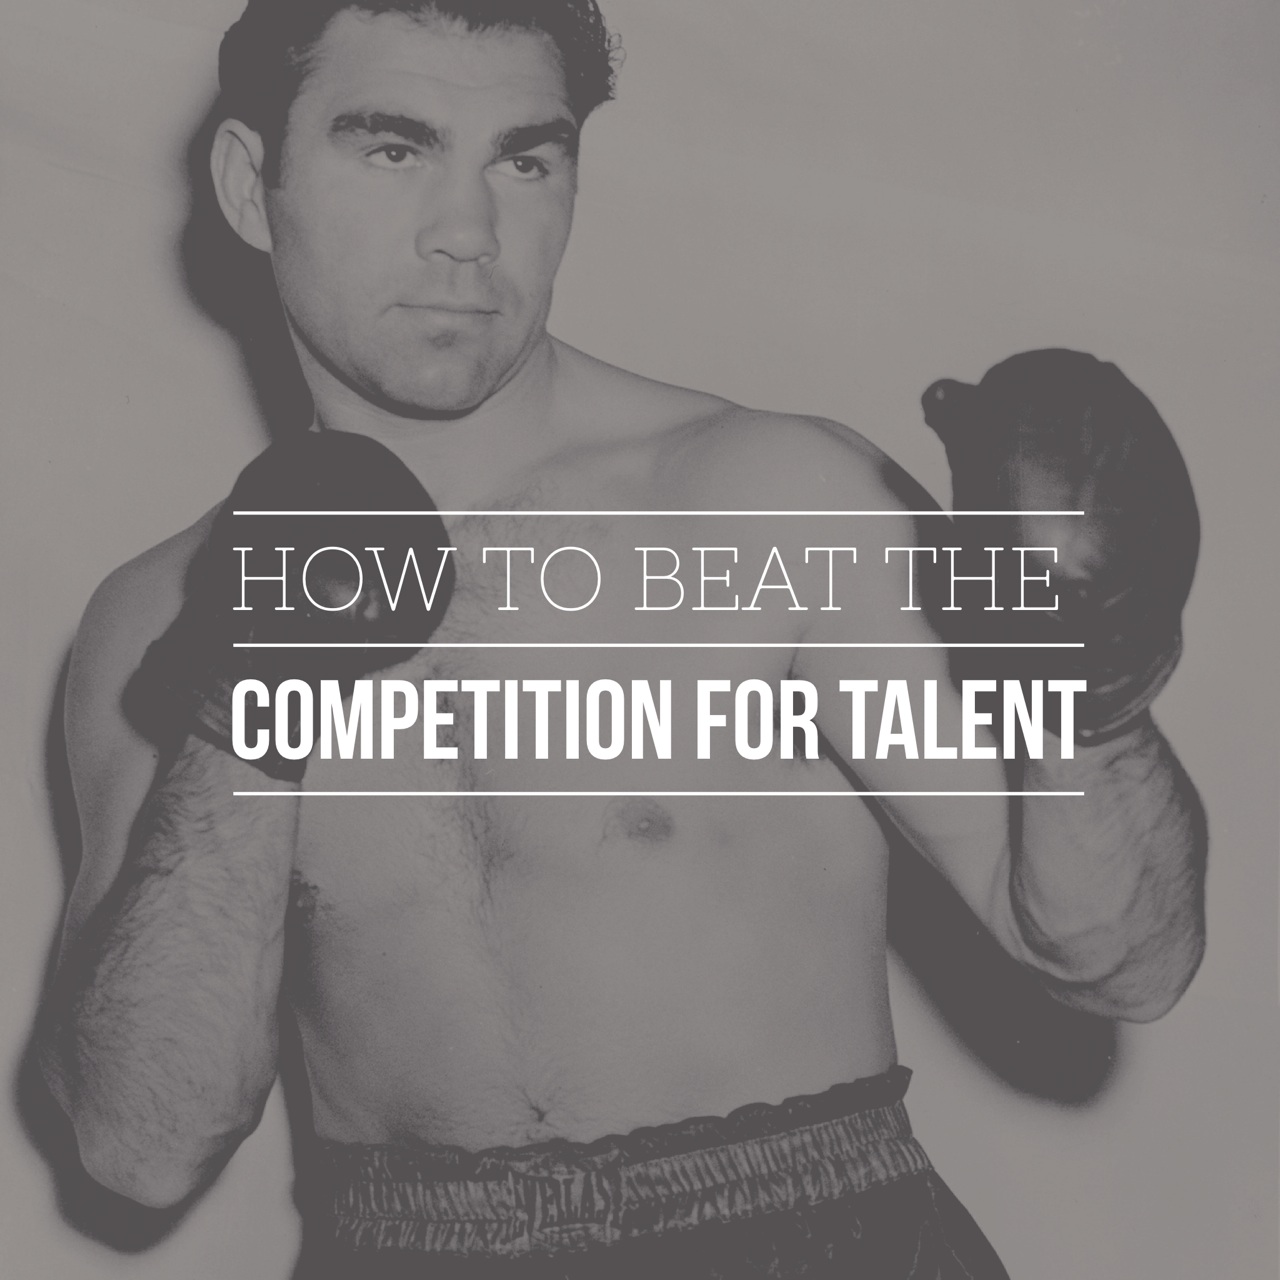 How to Beat the Competition for Talent